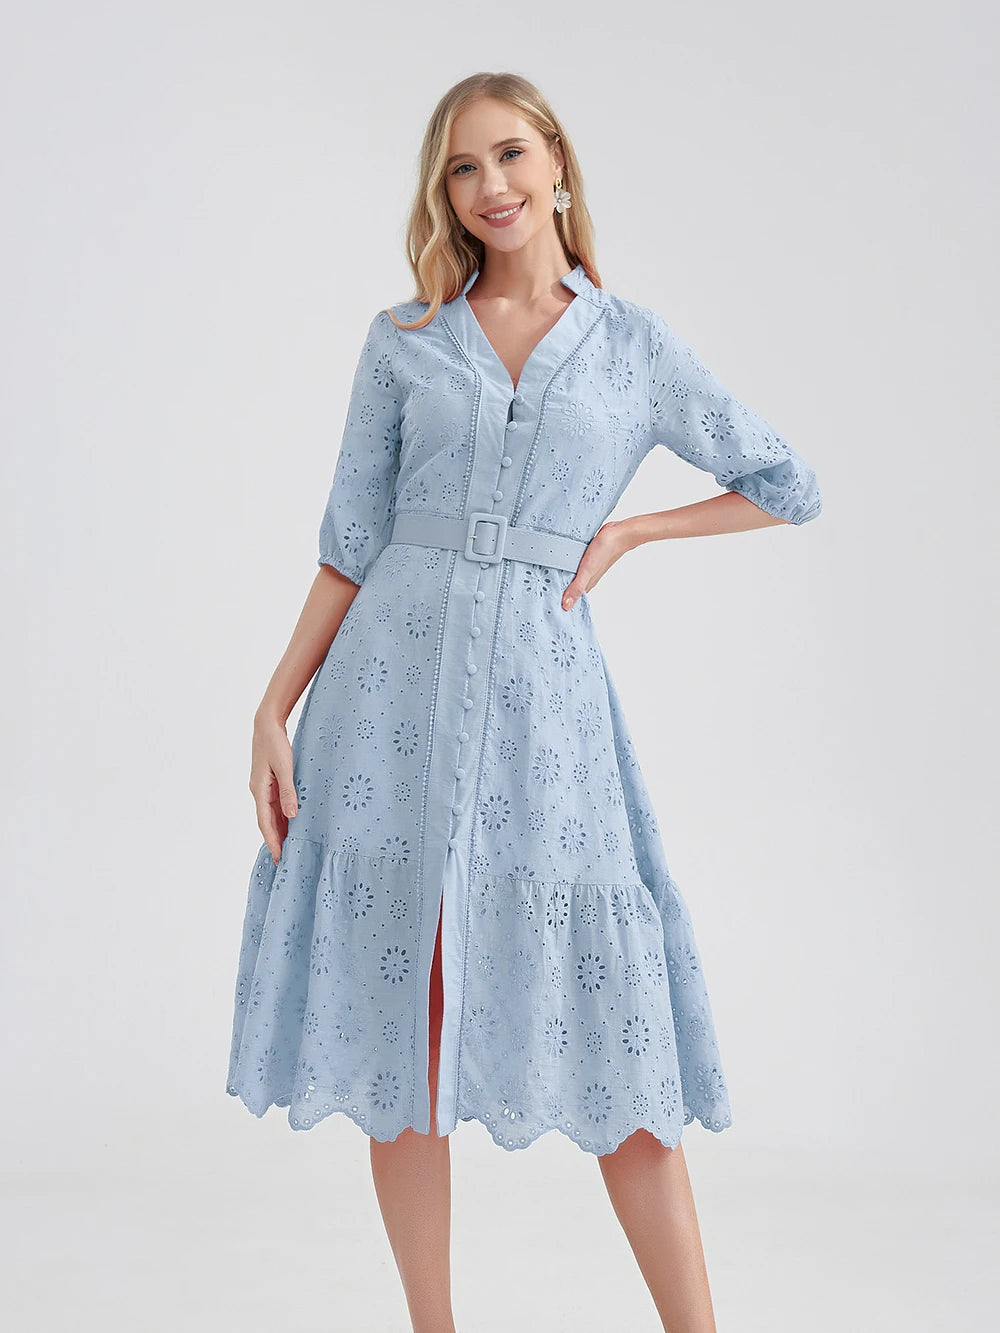 Cotton Hollow Out Summer Dress Women Holiday Perppy Casual High Waist Ruffled Mini V-Neck Dresses A-line Frills Vestido voguable